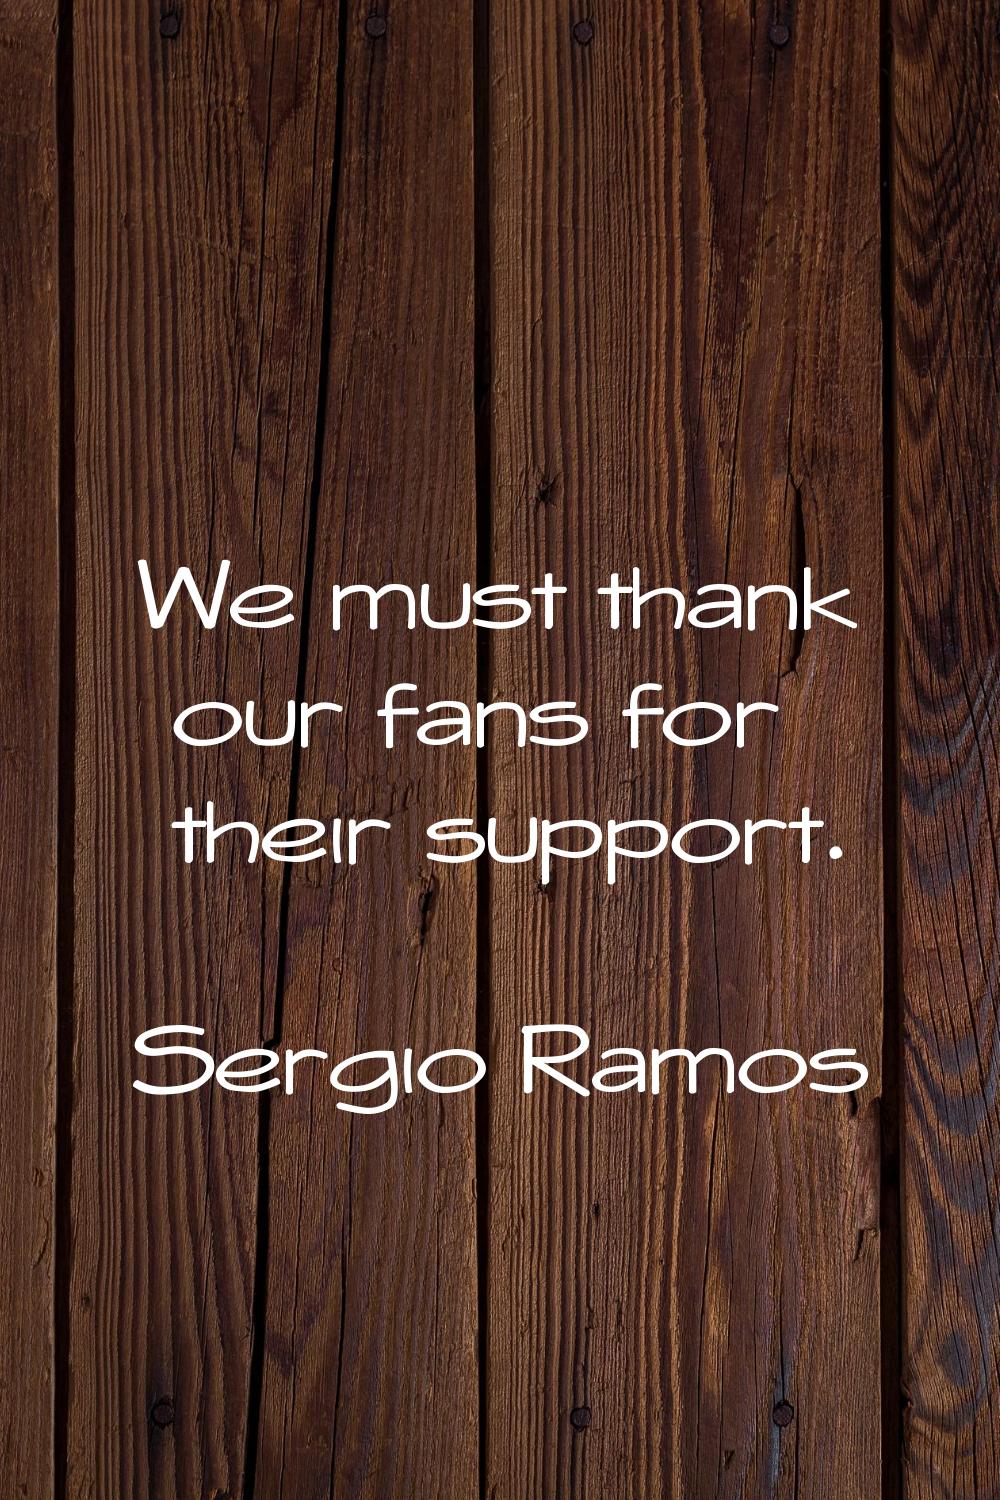 We must thank our fans for their support.